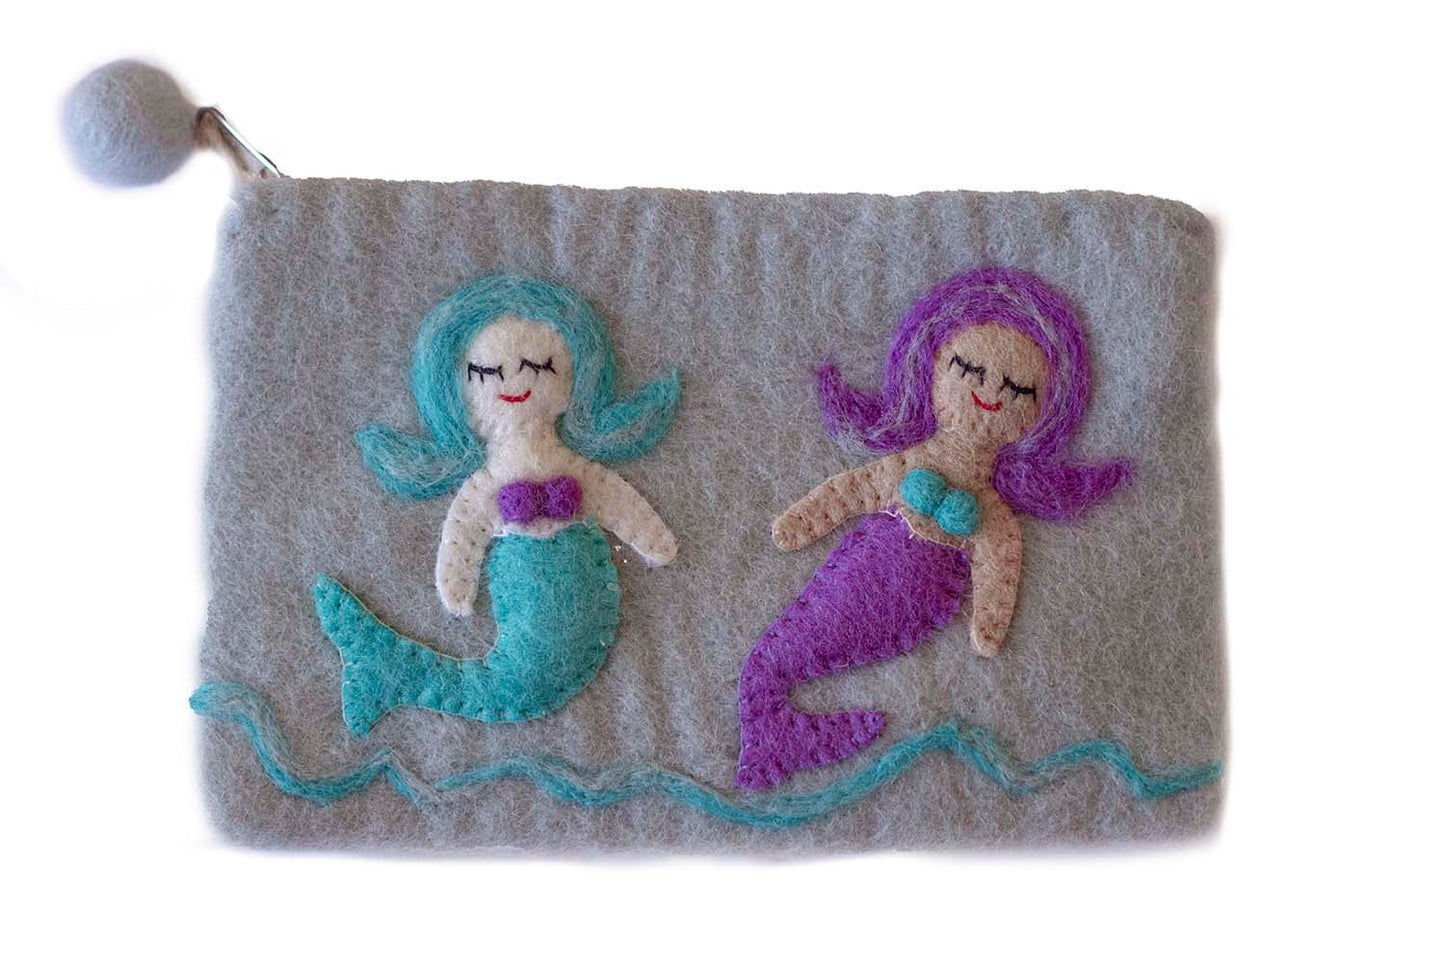 This Global Groove Life, handmade, ethical, fair trade, eco-friendly, sustainable, grey felt zipper coin pouch was created by artisans in Kathmandu Nepal and is adorned with an adorable mermaid motif.